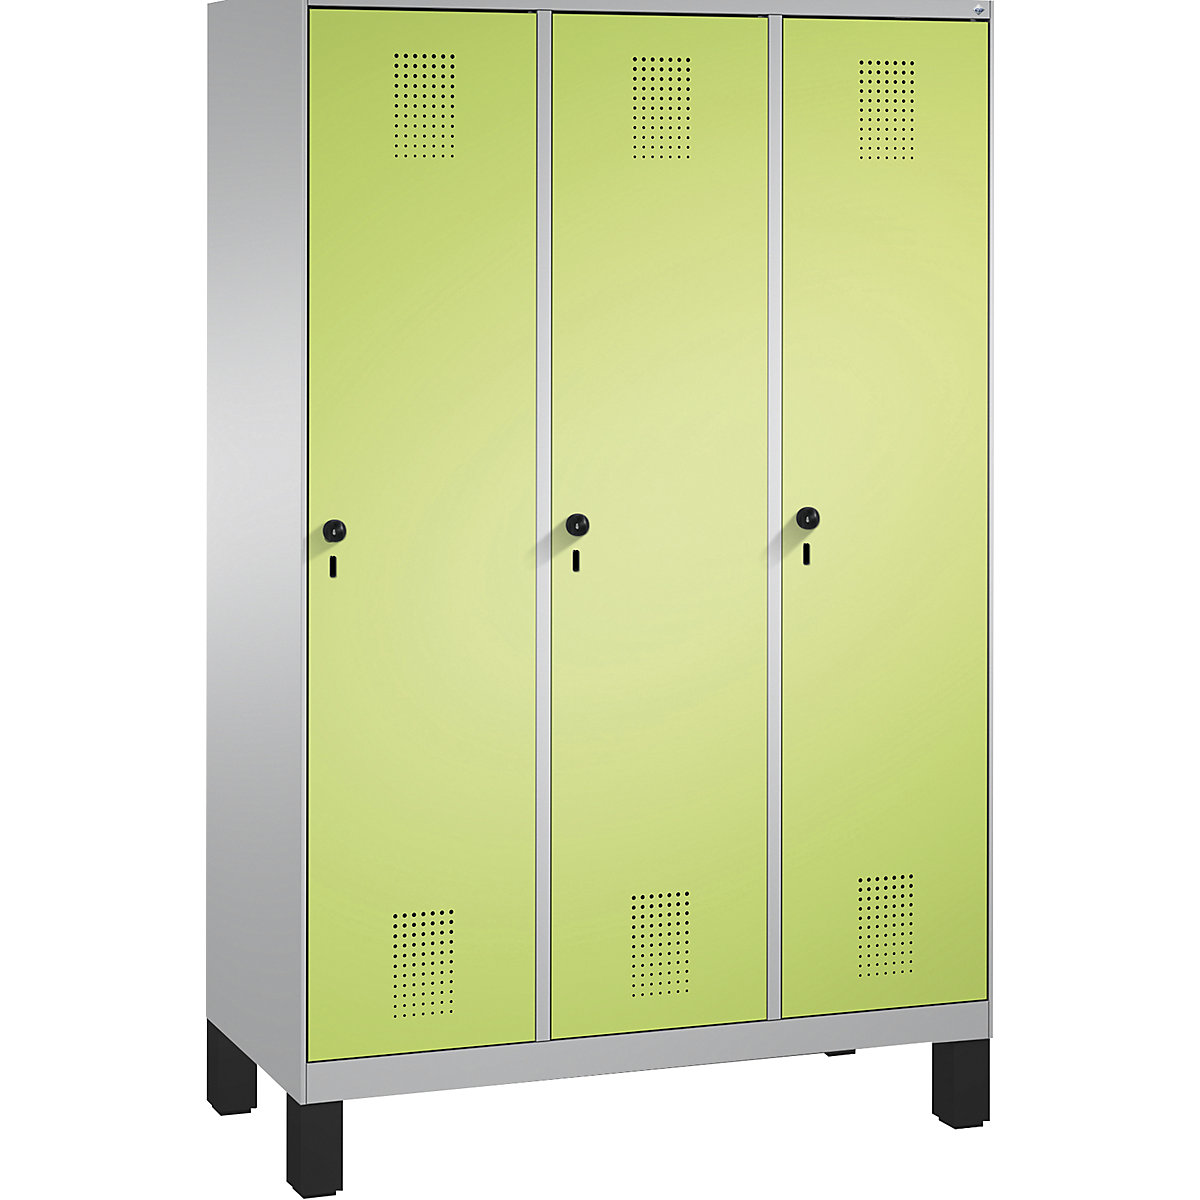 EVOLO cloakroom locker, with feet – C+P, 3 compartments, compartment width 400 mm, white aluminium / viridian green-8